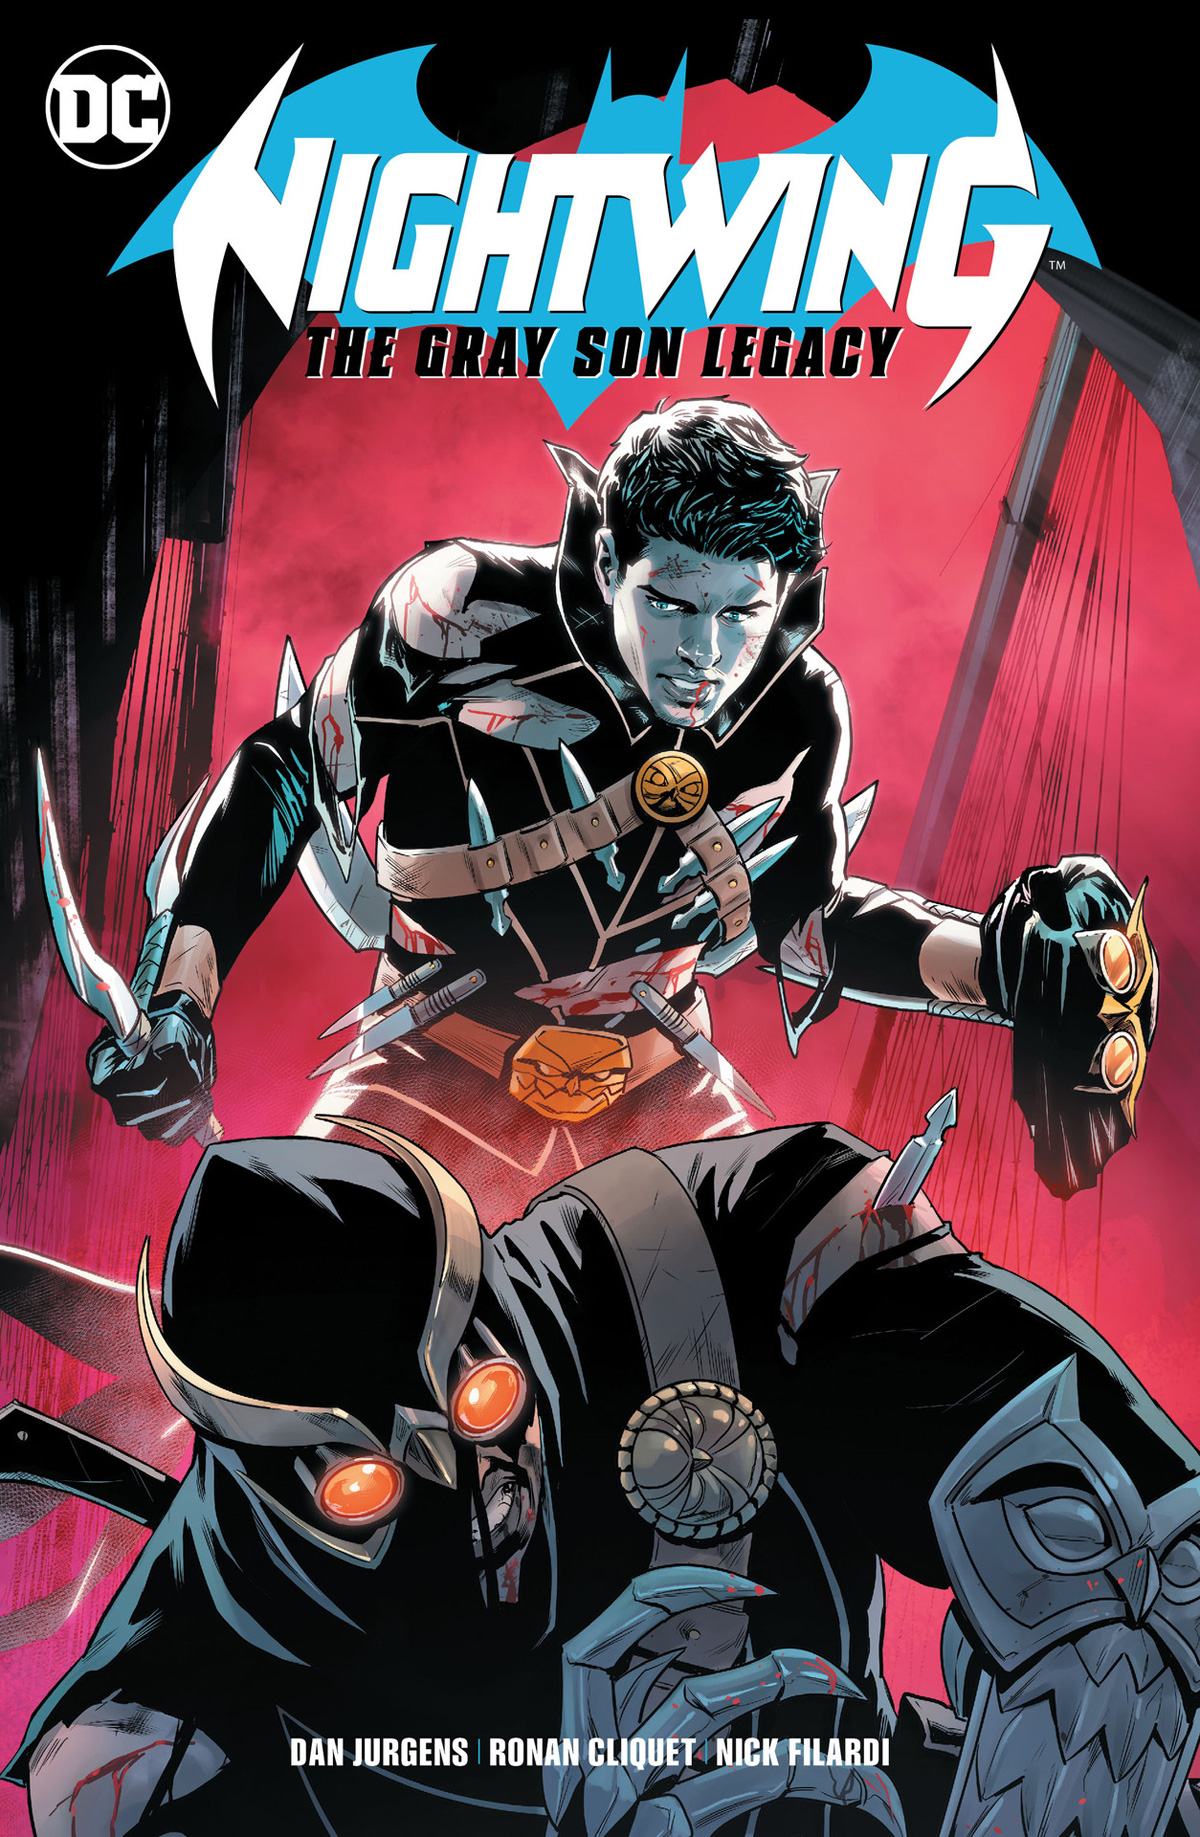 Nightwing (2019) Vol 1 The Gray Son Legacy TP